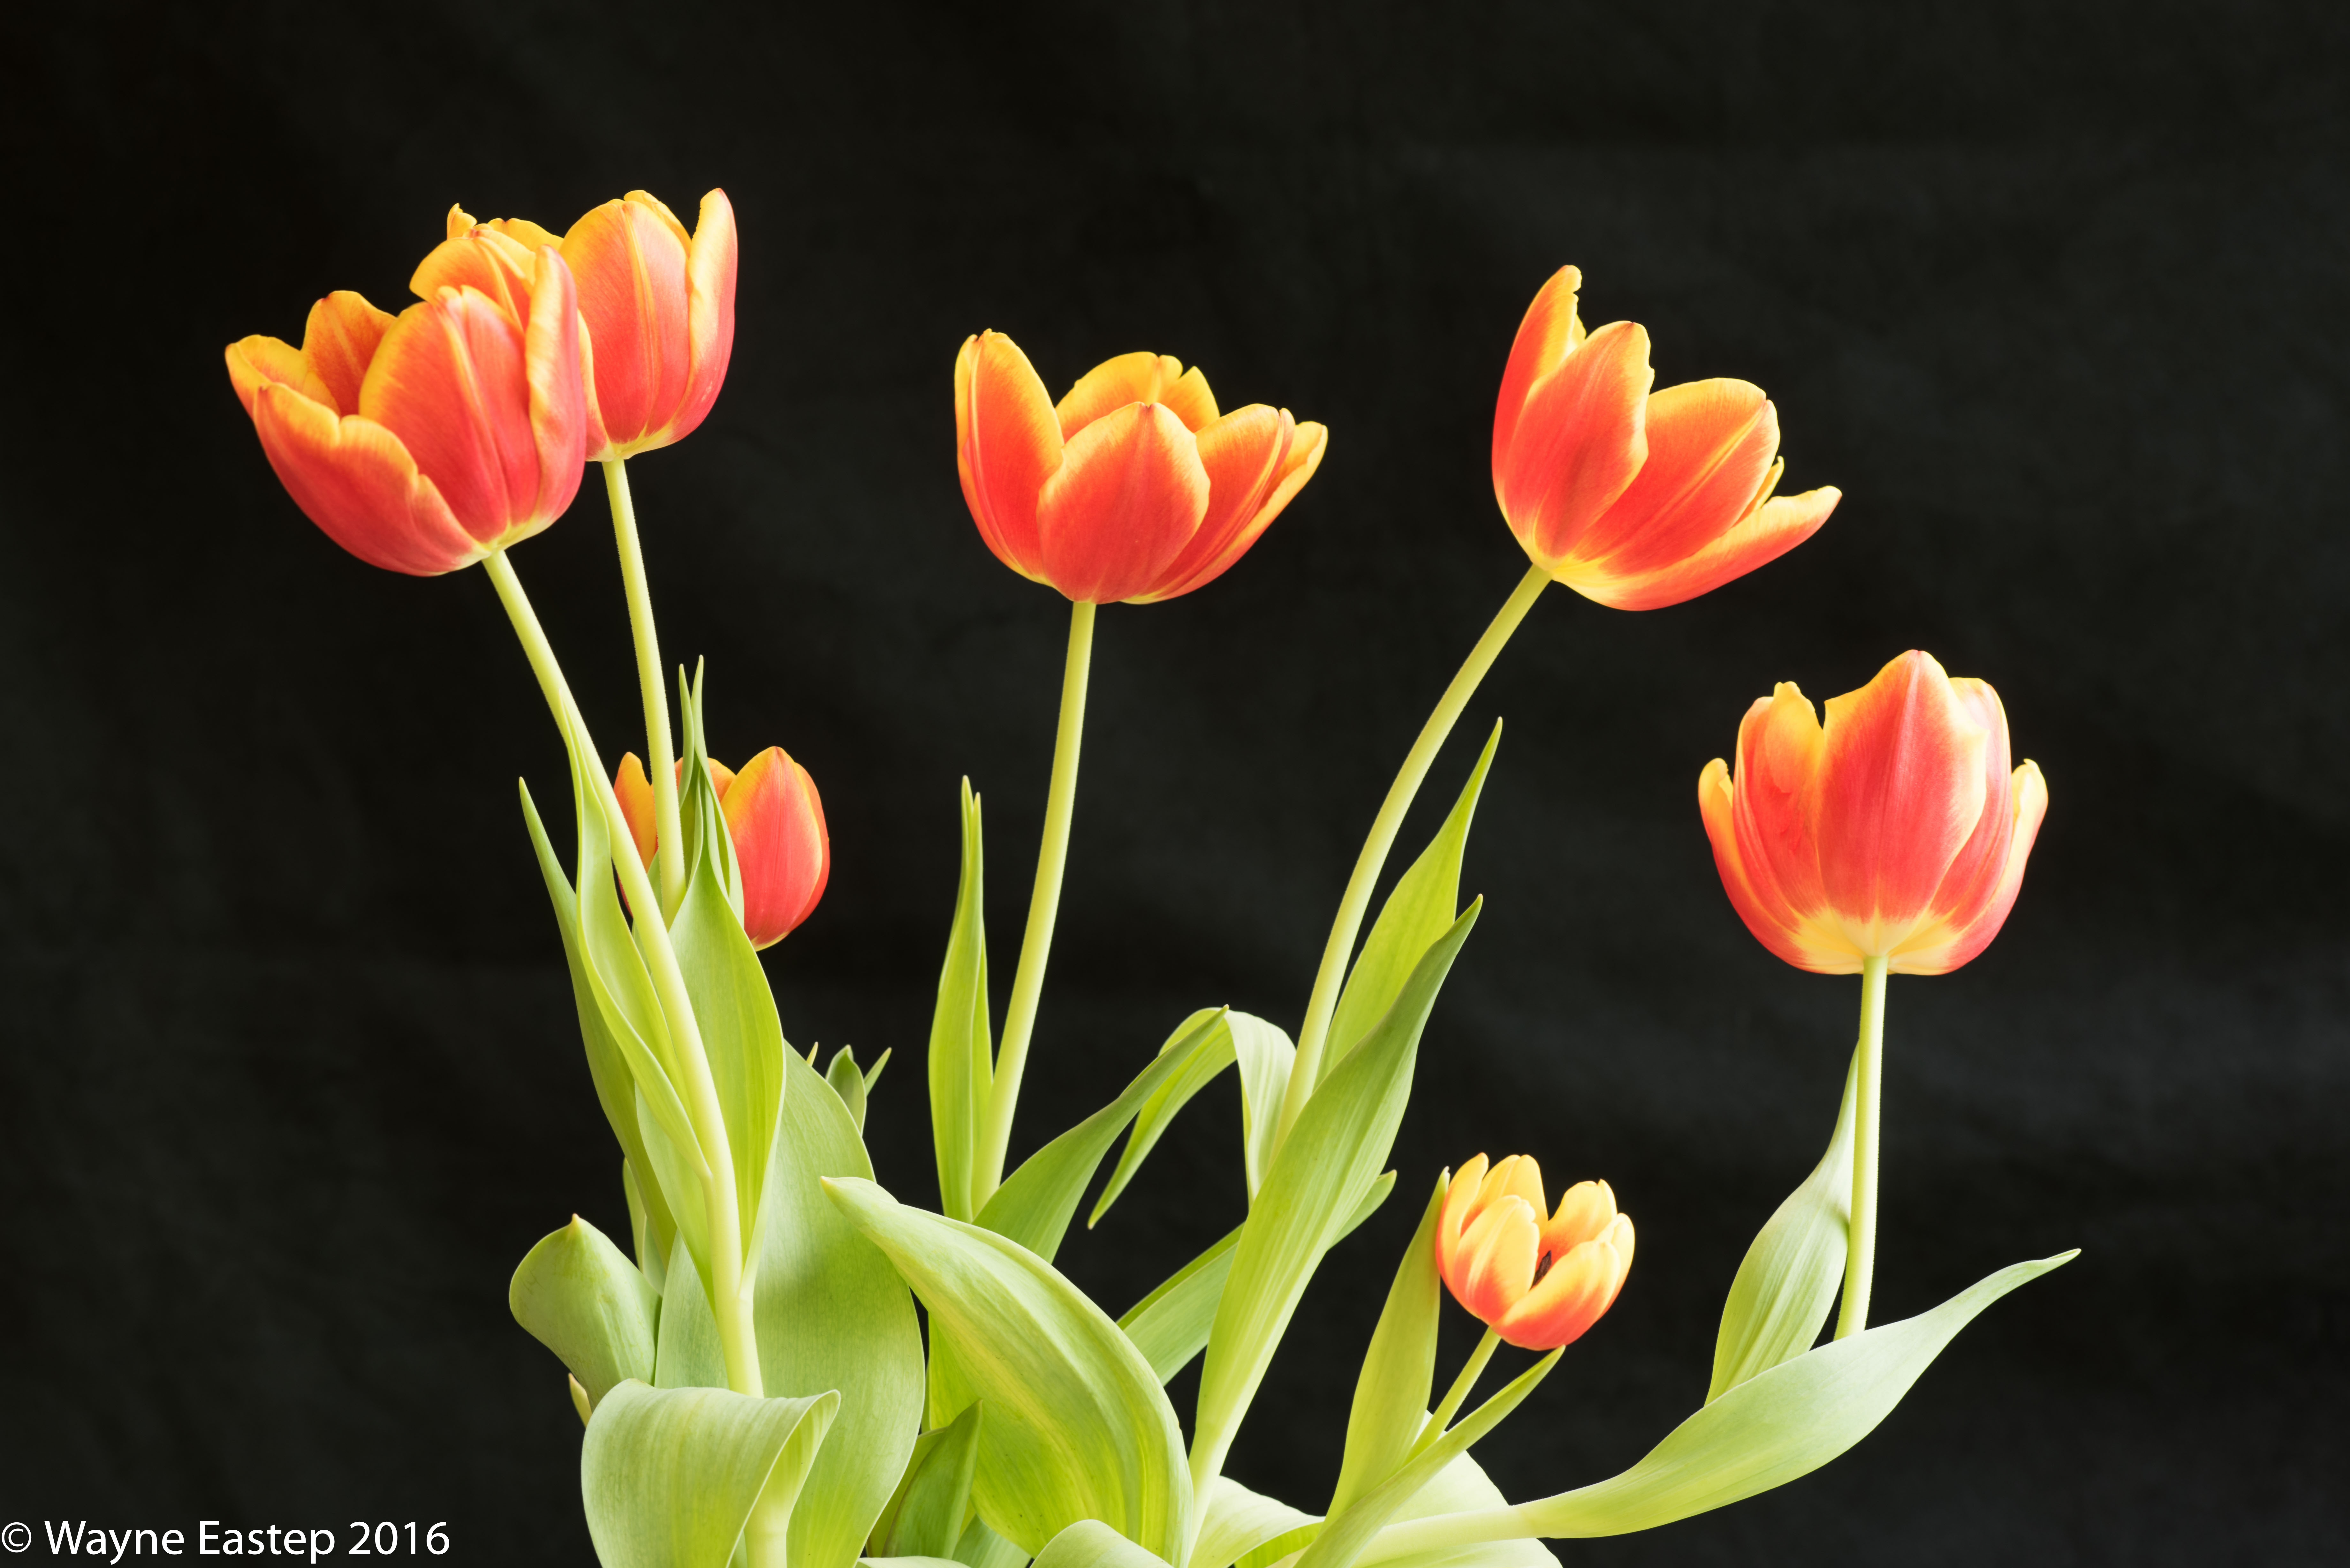 Flowers, Tulips, Standard Tulips, Photographic Art, Interior Design, Art, Images, Color, Red & Yellow,